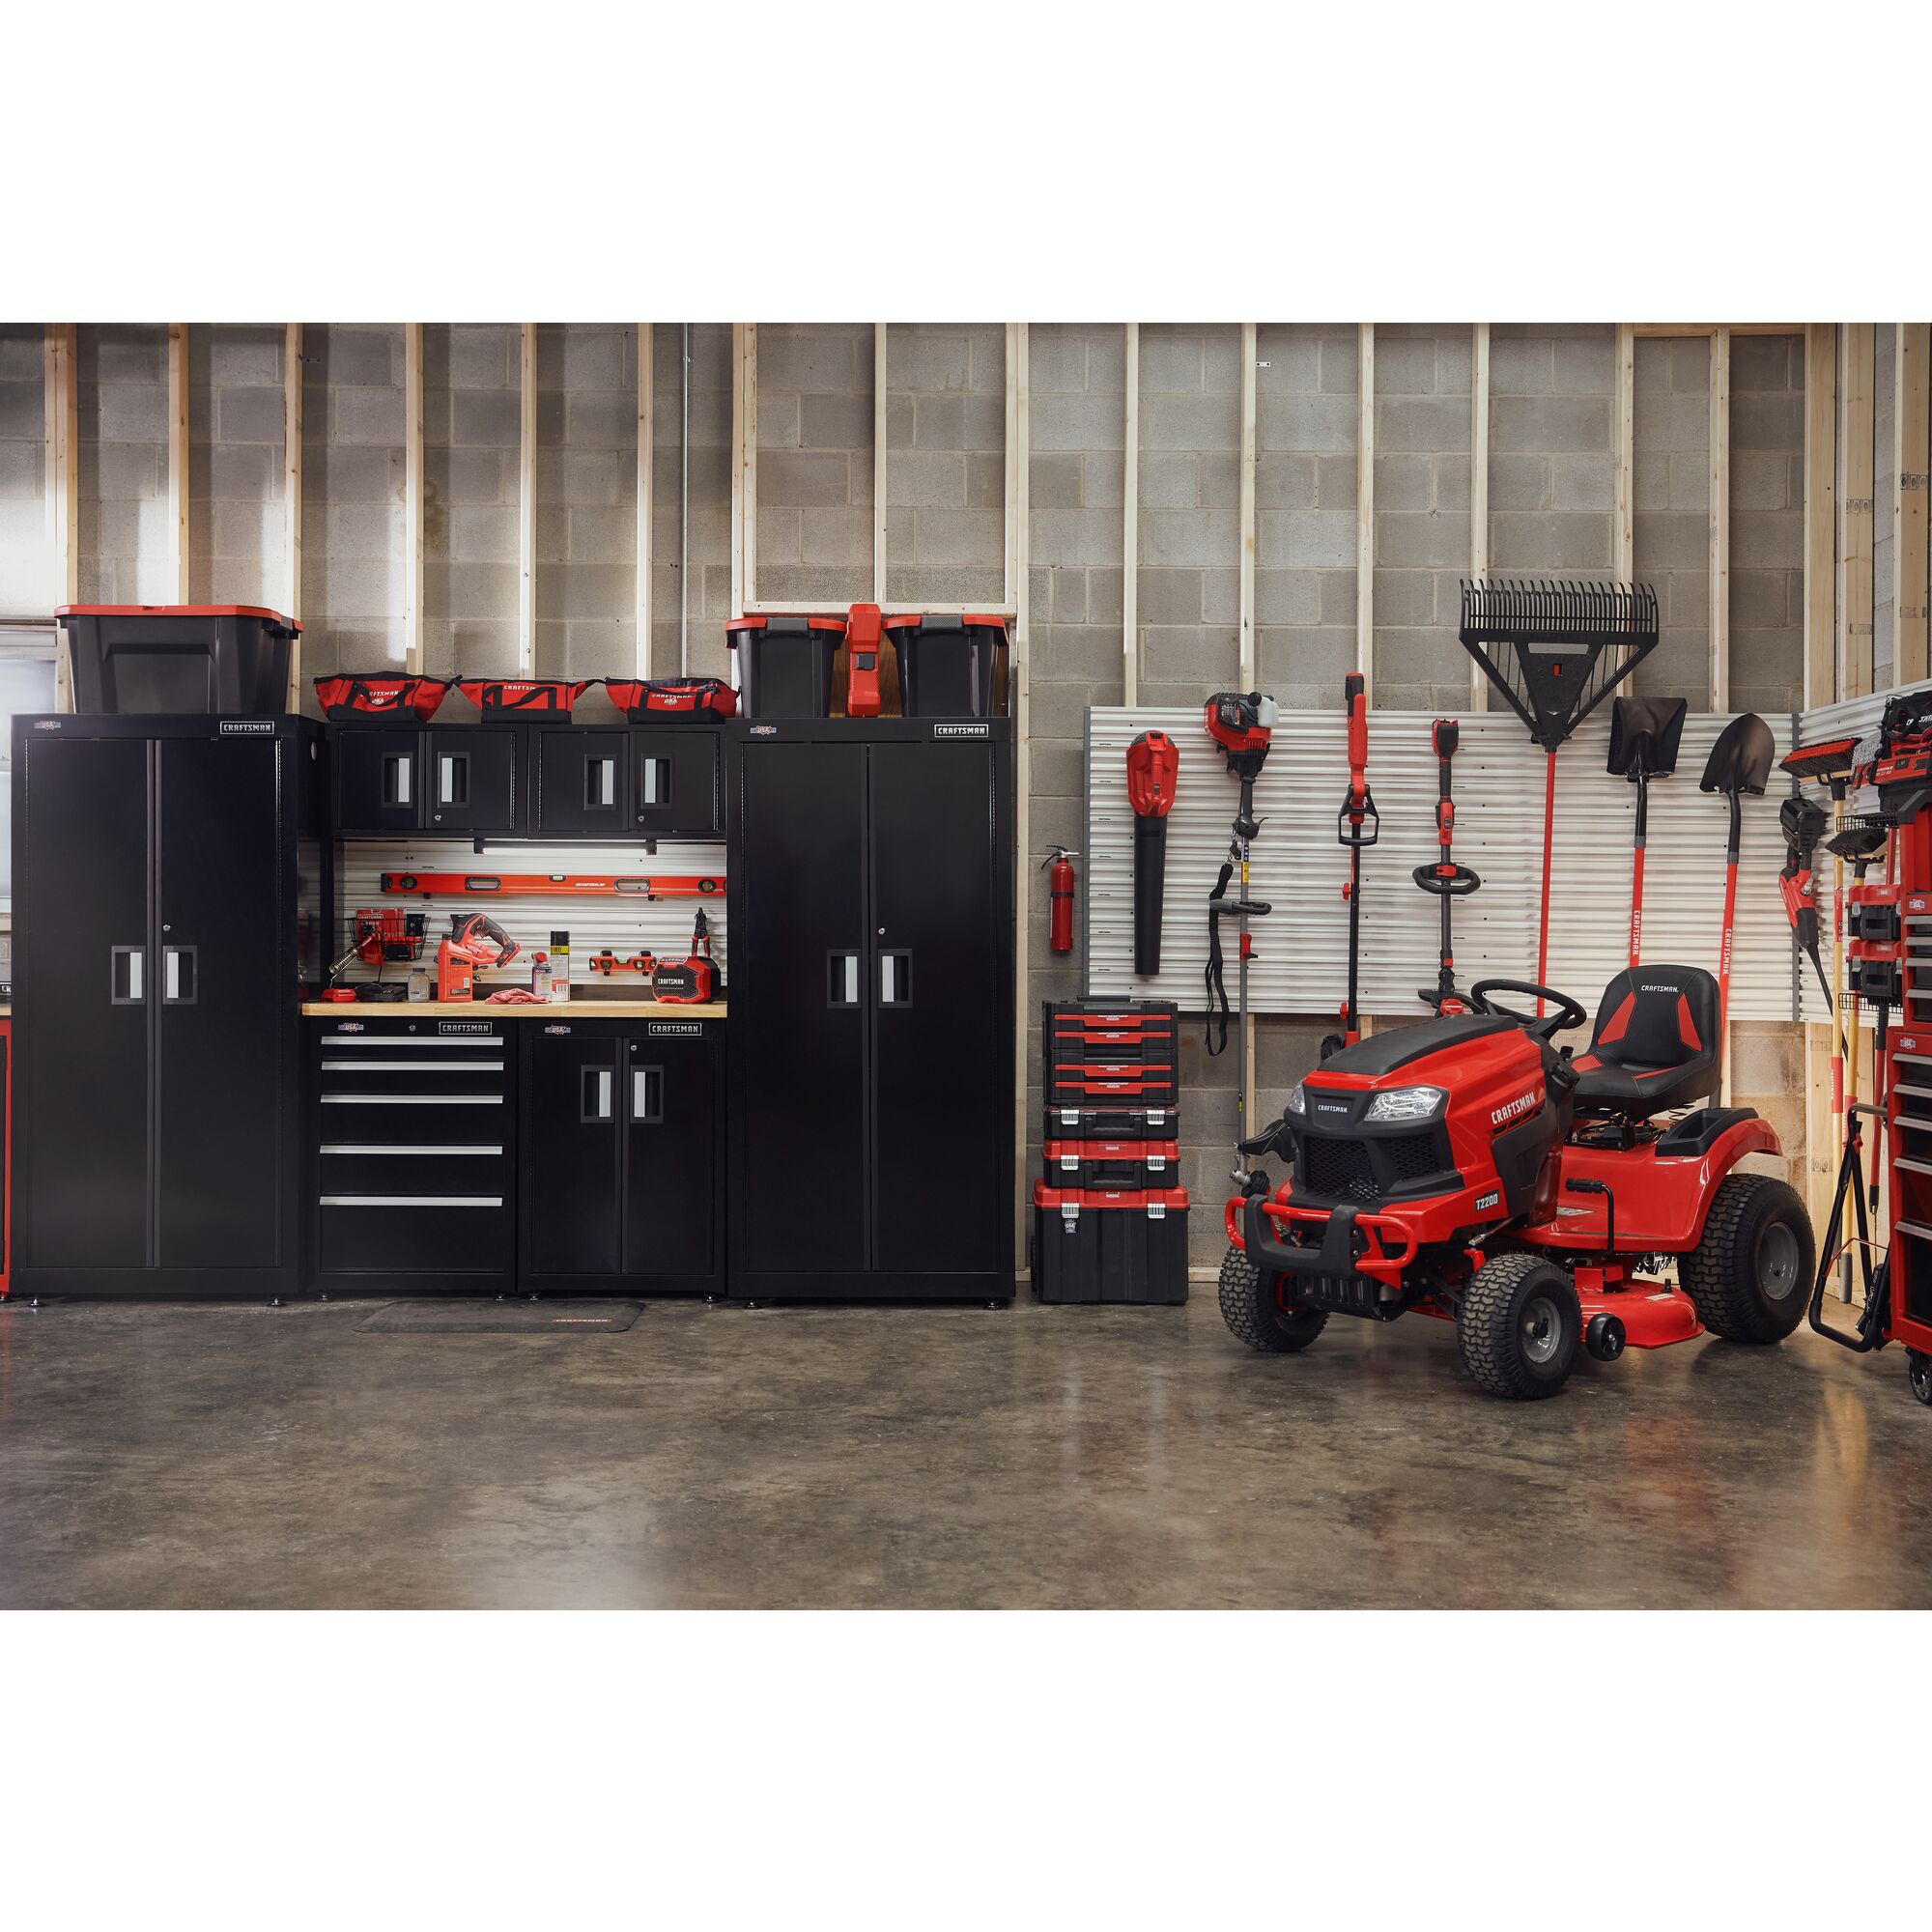 Garage filled with CRAFTSMAN storage, power tools, outdoor products, hand tools, and accessories.